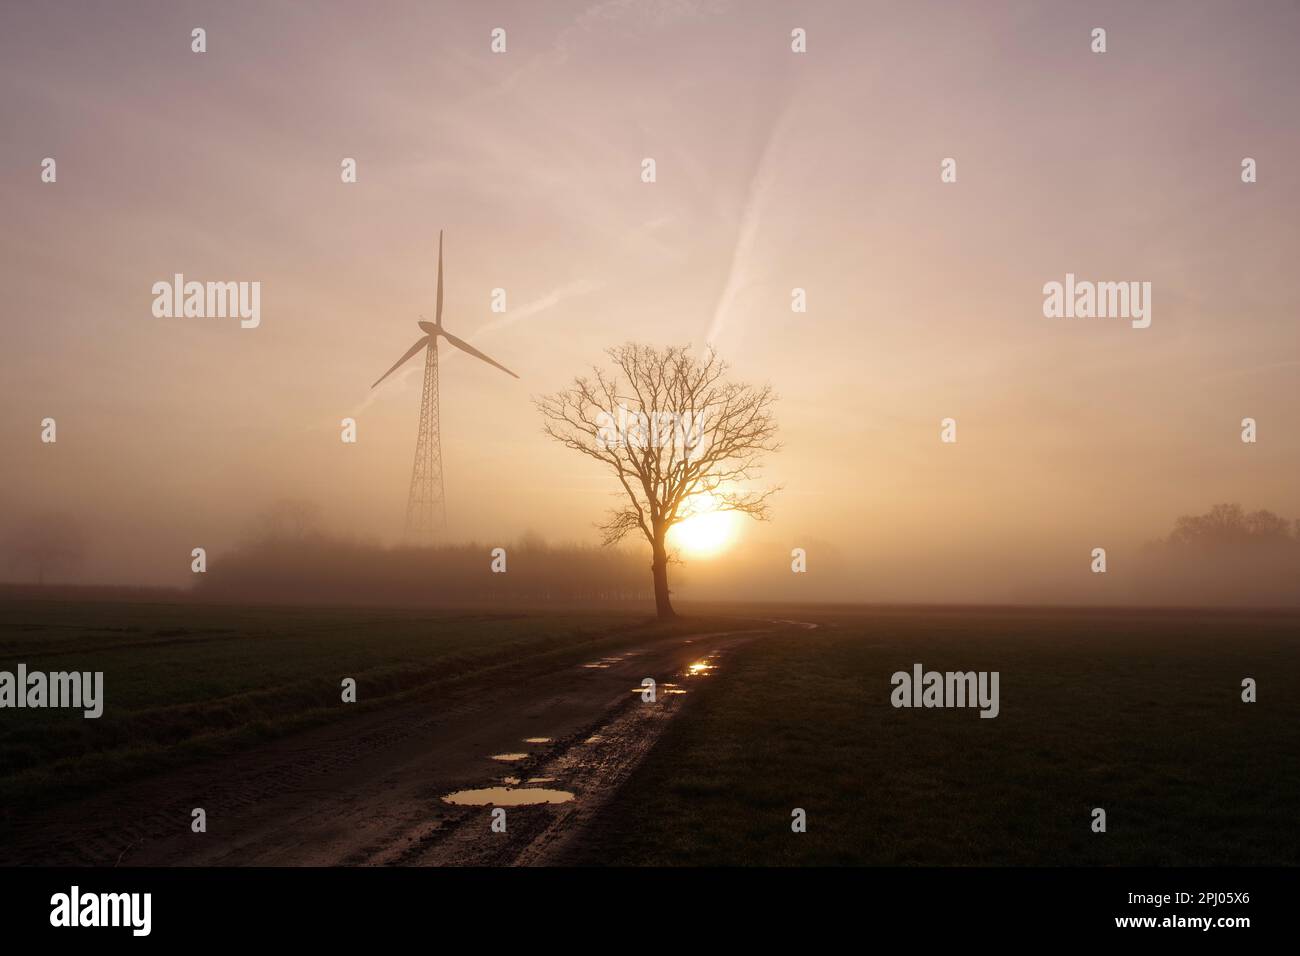 Landscape, tree, wind generator, path, puddle, fog, sunrise, sky, colour, winter, Germany, The rising sun shines through the fog and makes the Stock Photo